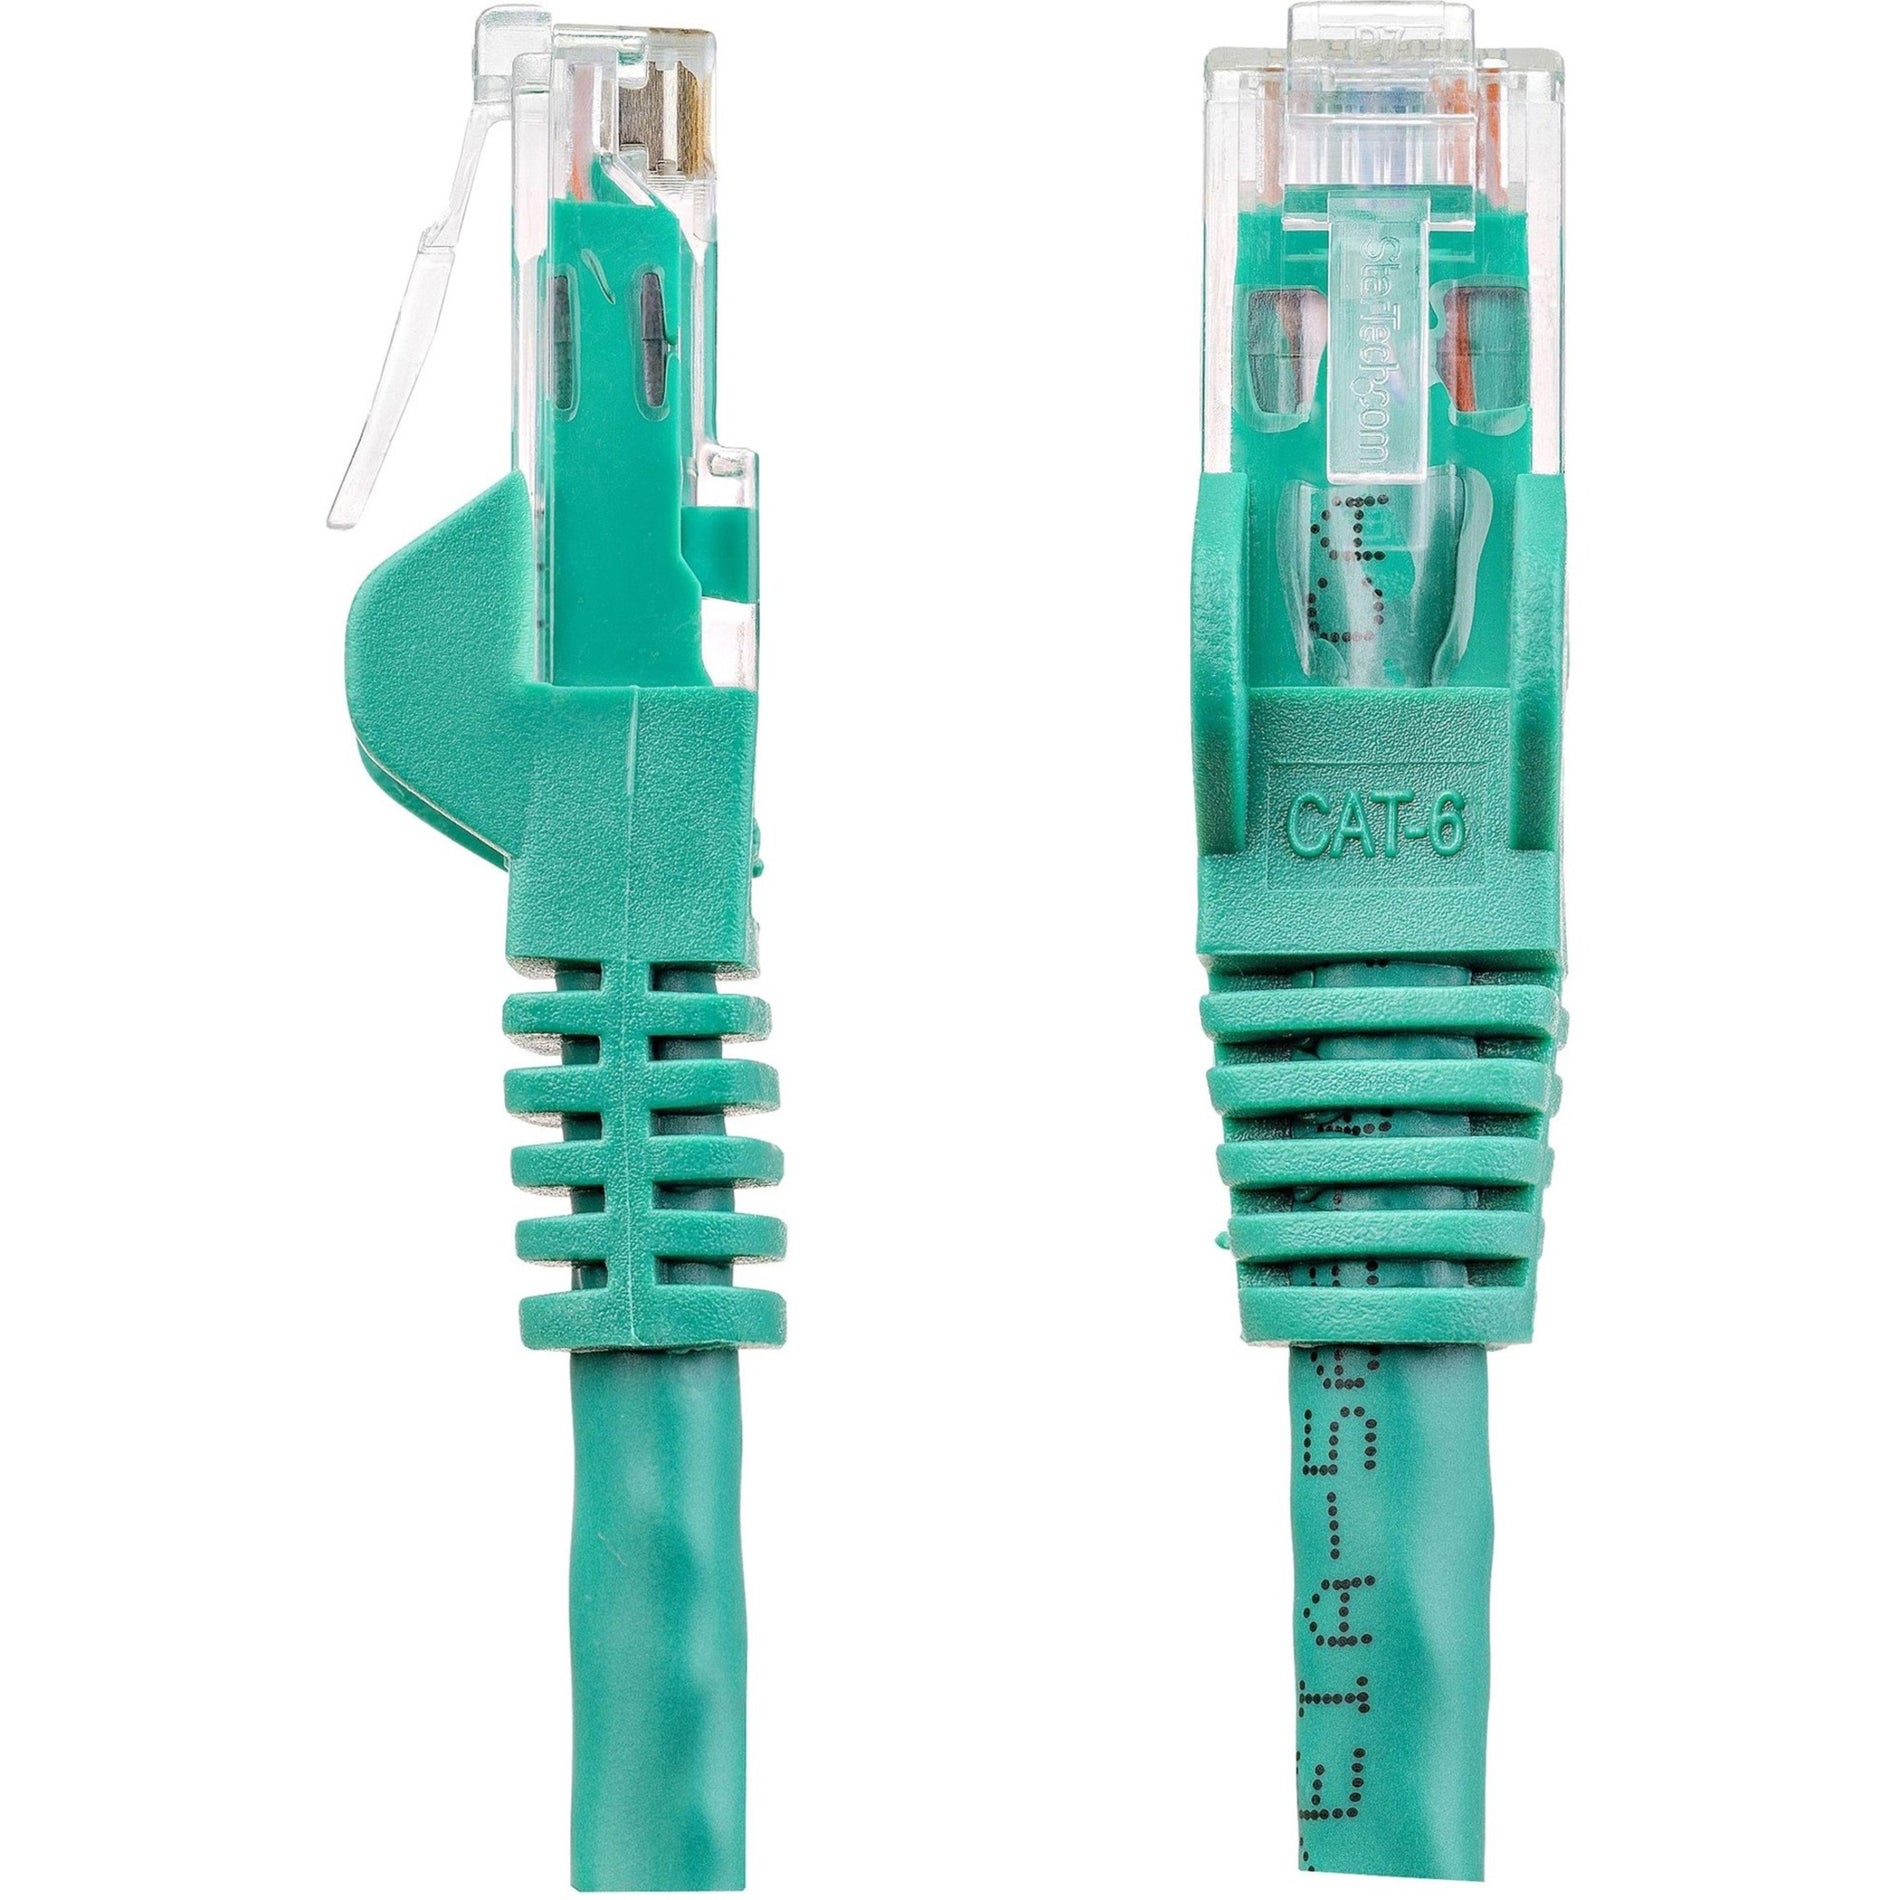 StarTech.com N6PATCH12GN Cat6 Patch Cable, 12ft Green Ethernet Cable, Snagless RJ45 Connectors